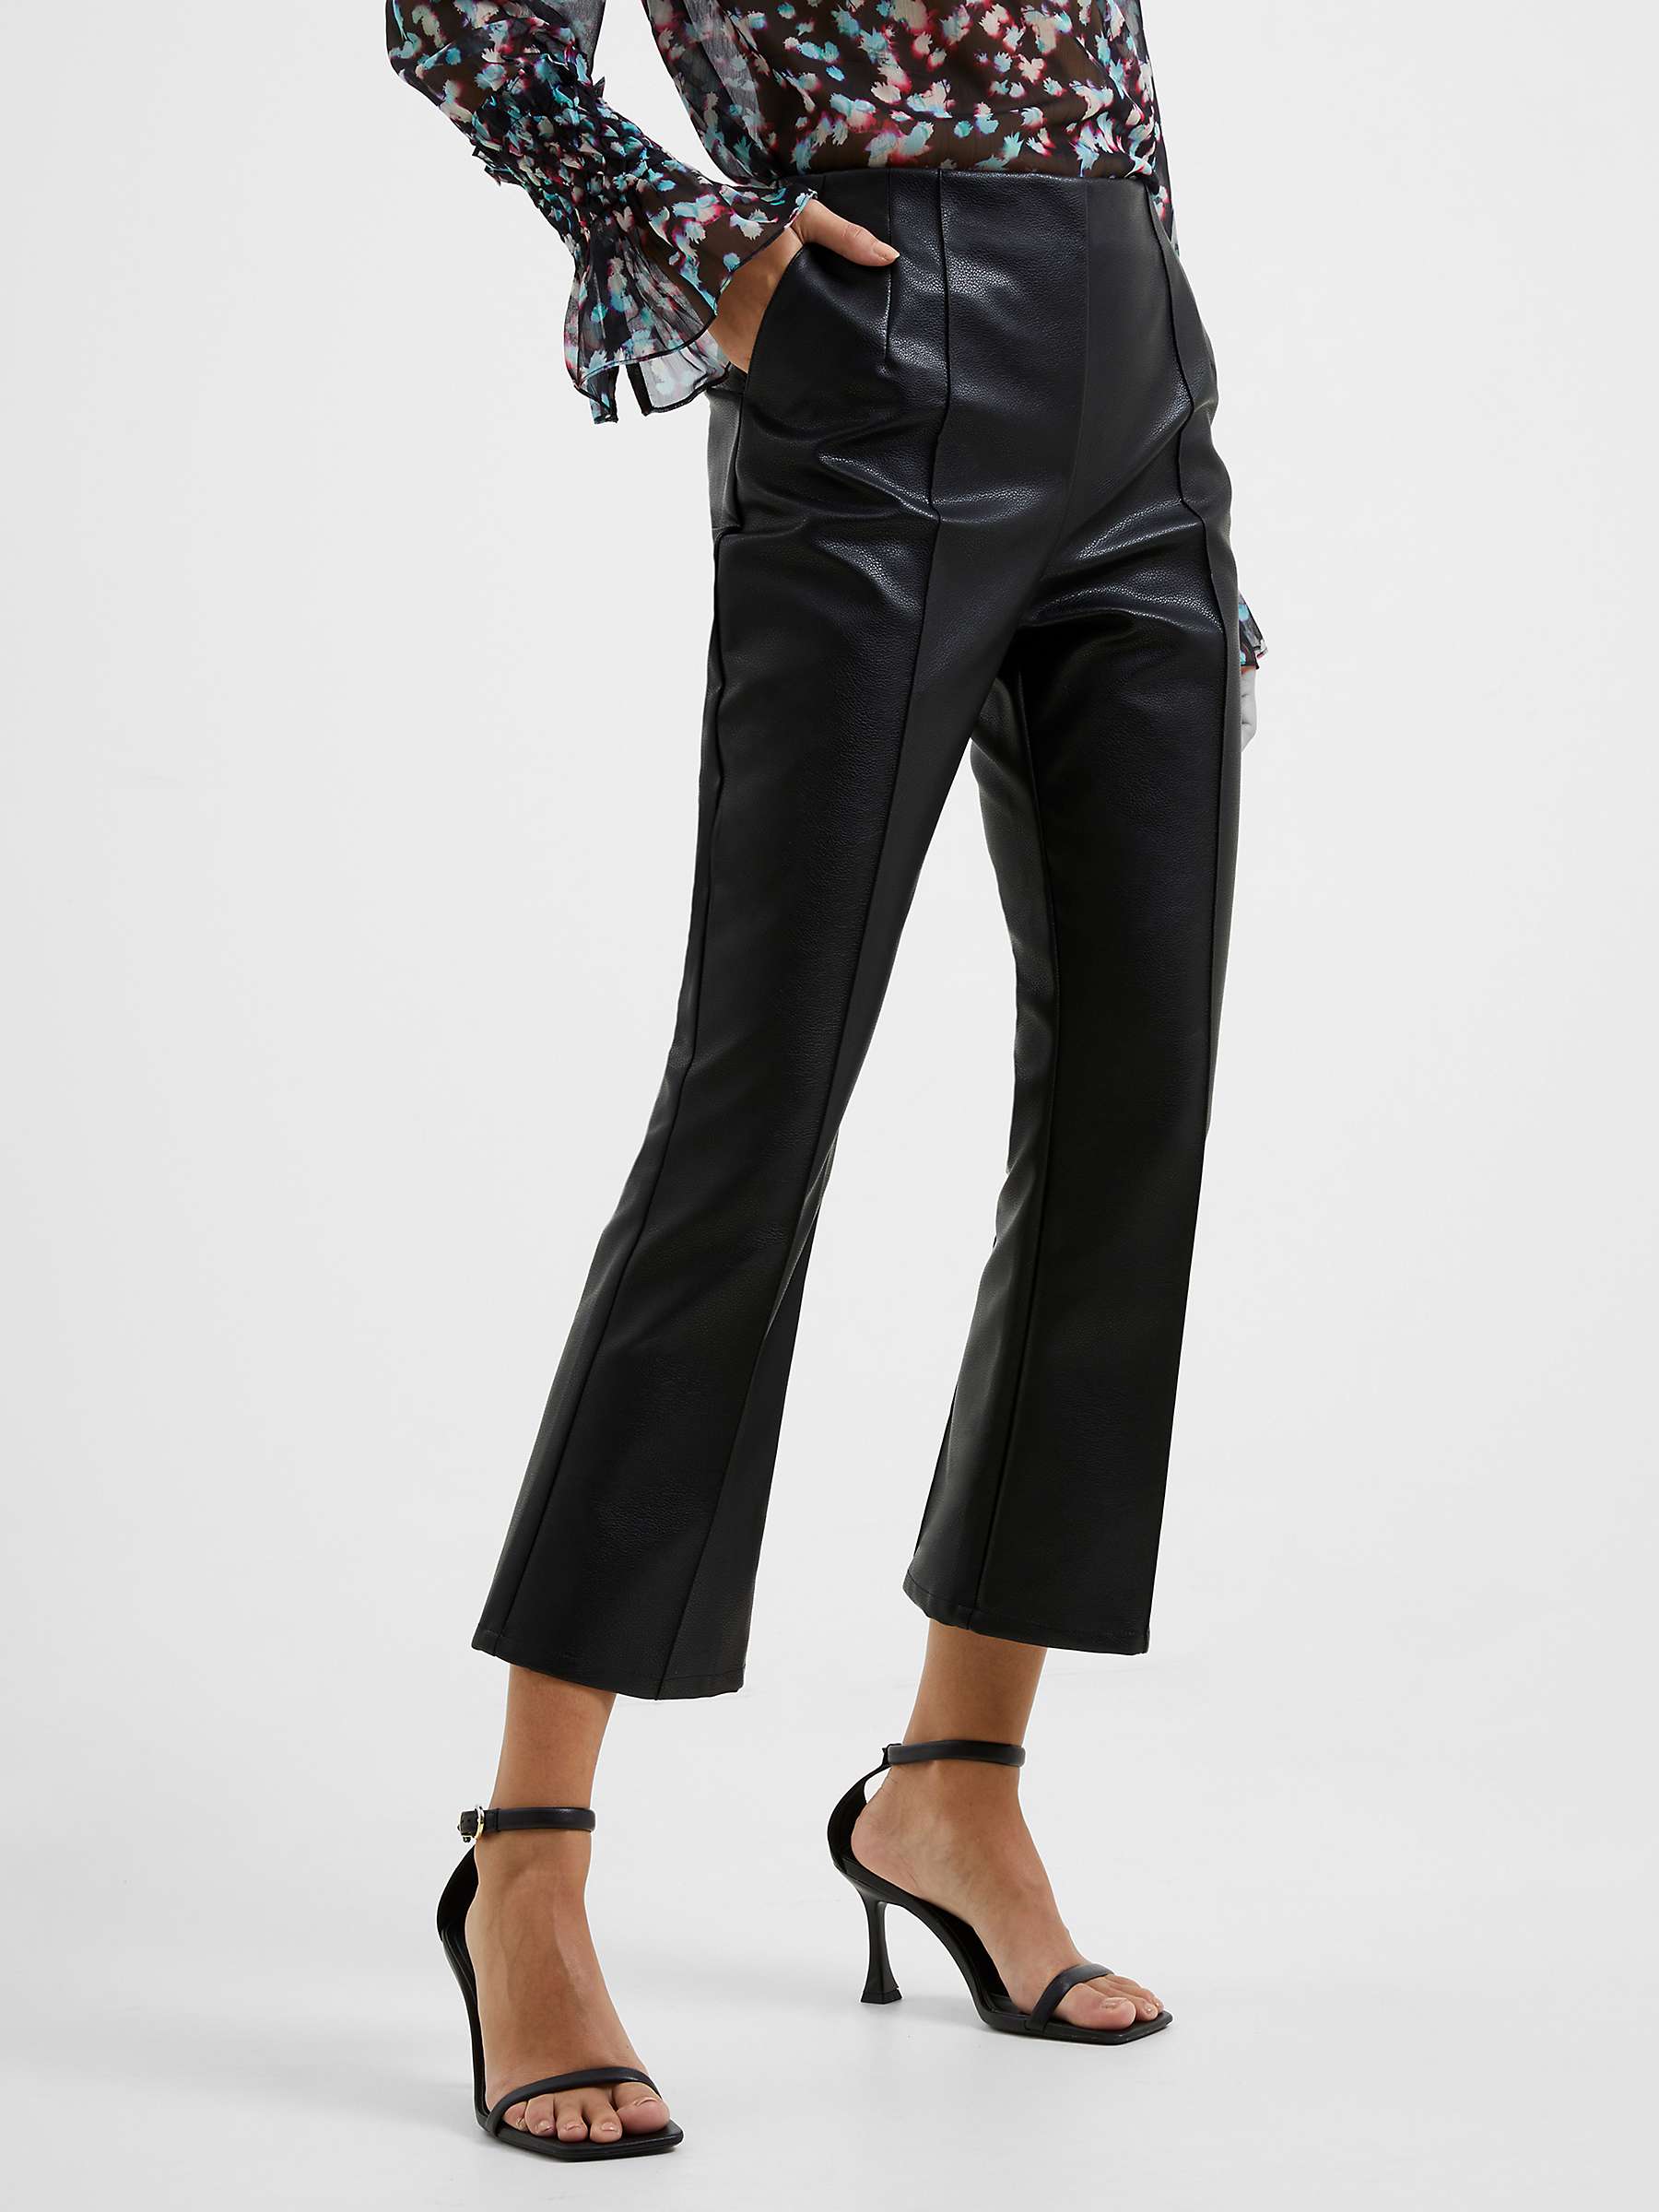 Buy French Connection Claudia PU Strech Trouser, Blackout Online at johnlewis.com